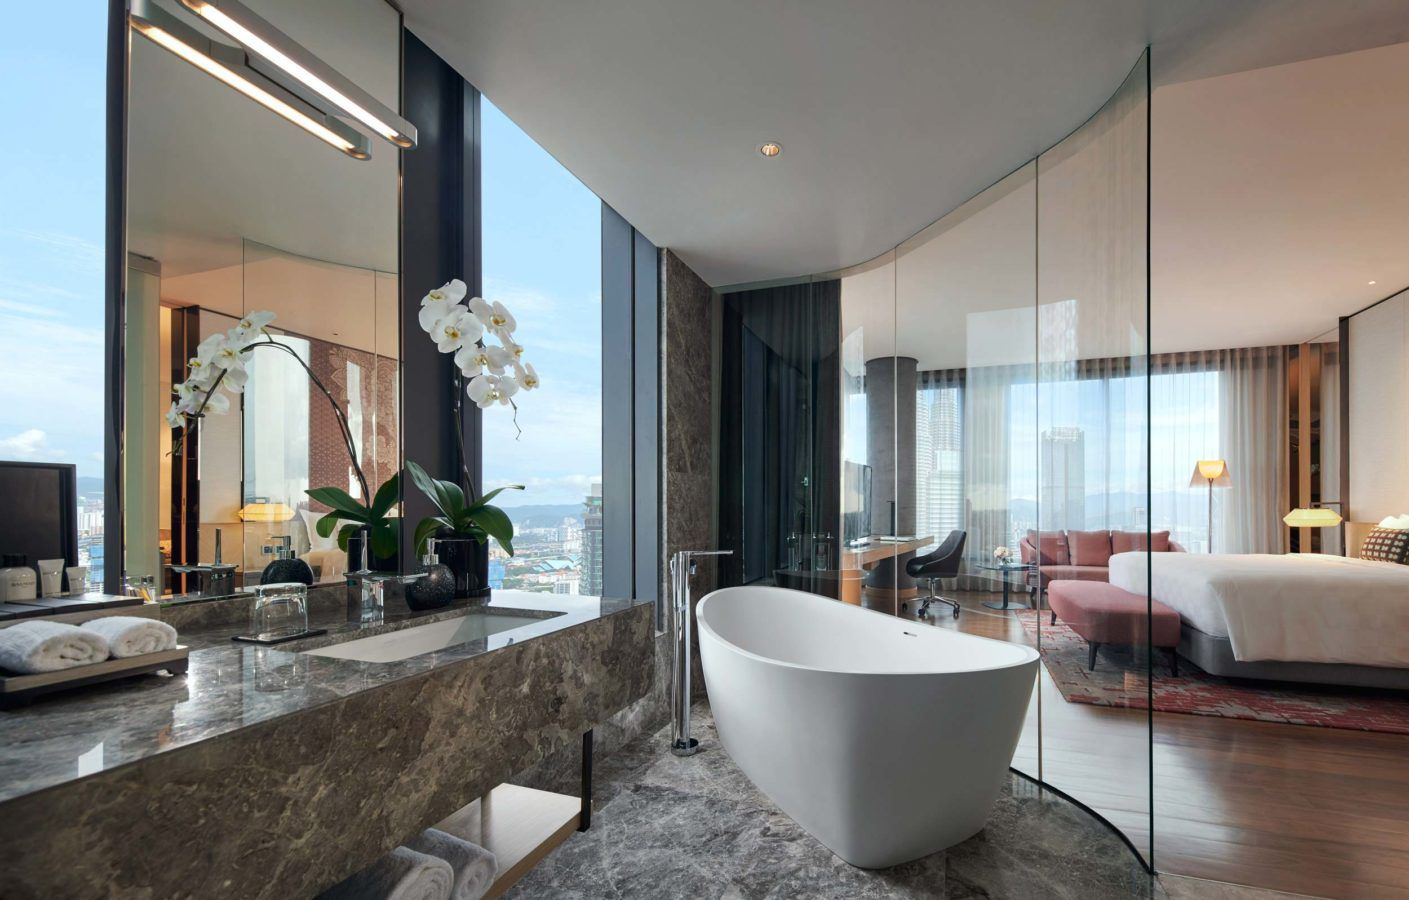 These luxury hotel suites in KL boast bathtubs with a killer view